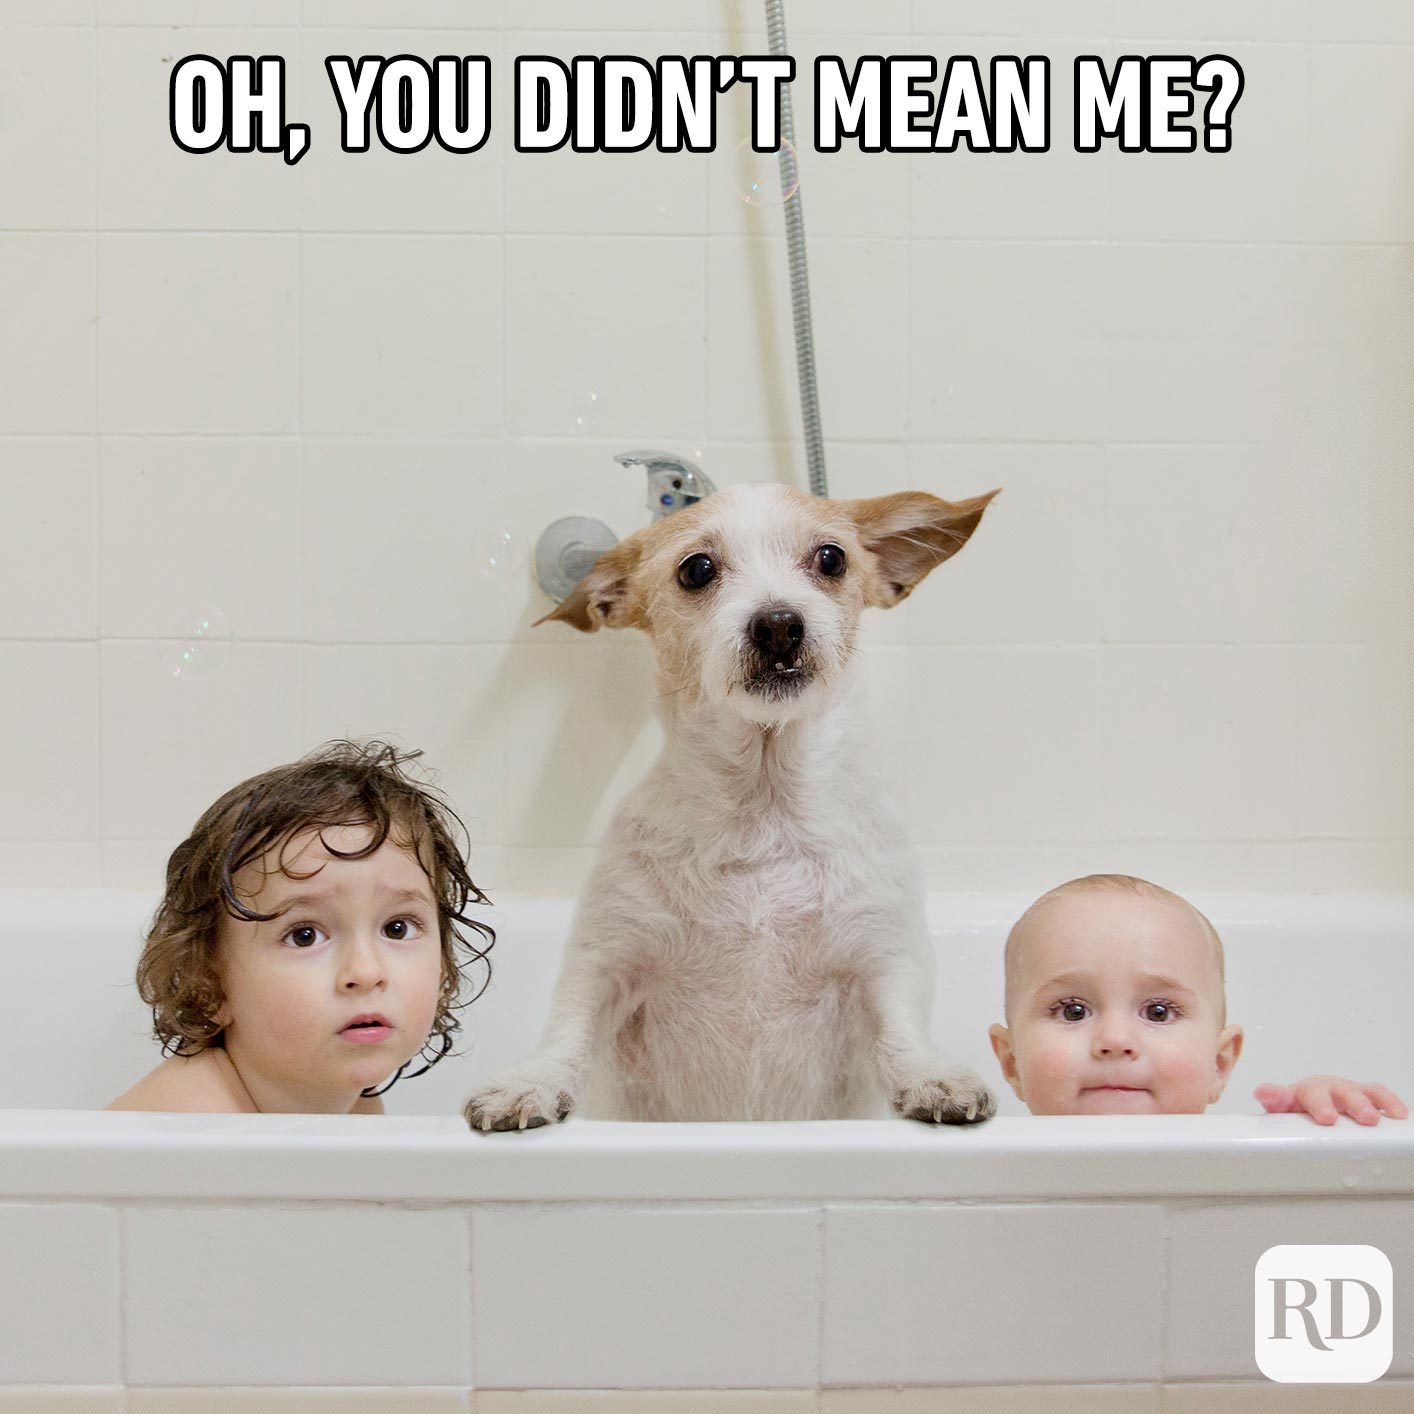 Dog beside two children in bathtub. Meme text: Oh, you didn't mean me?